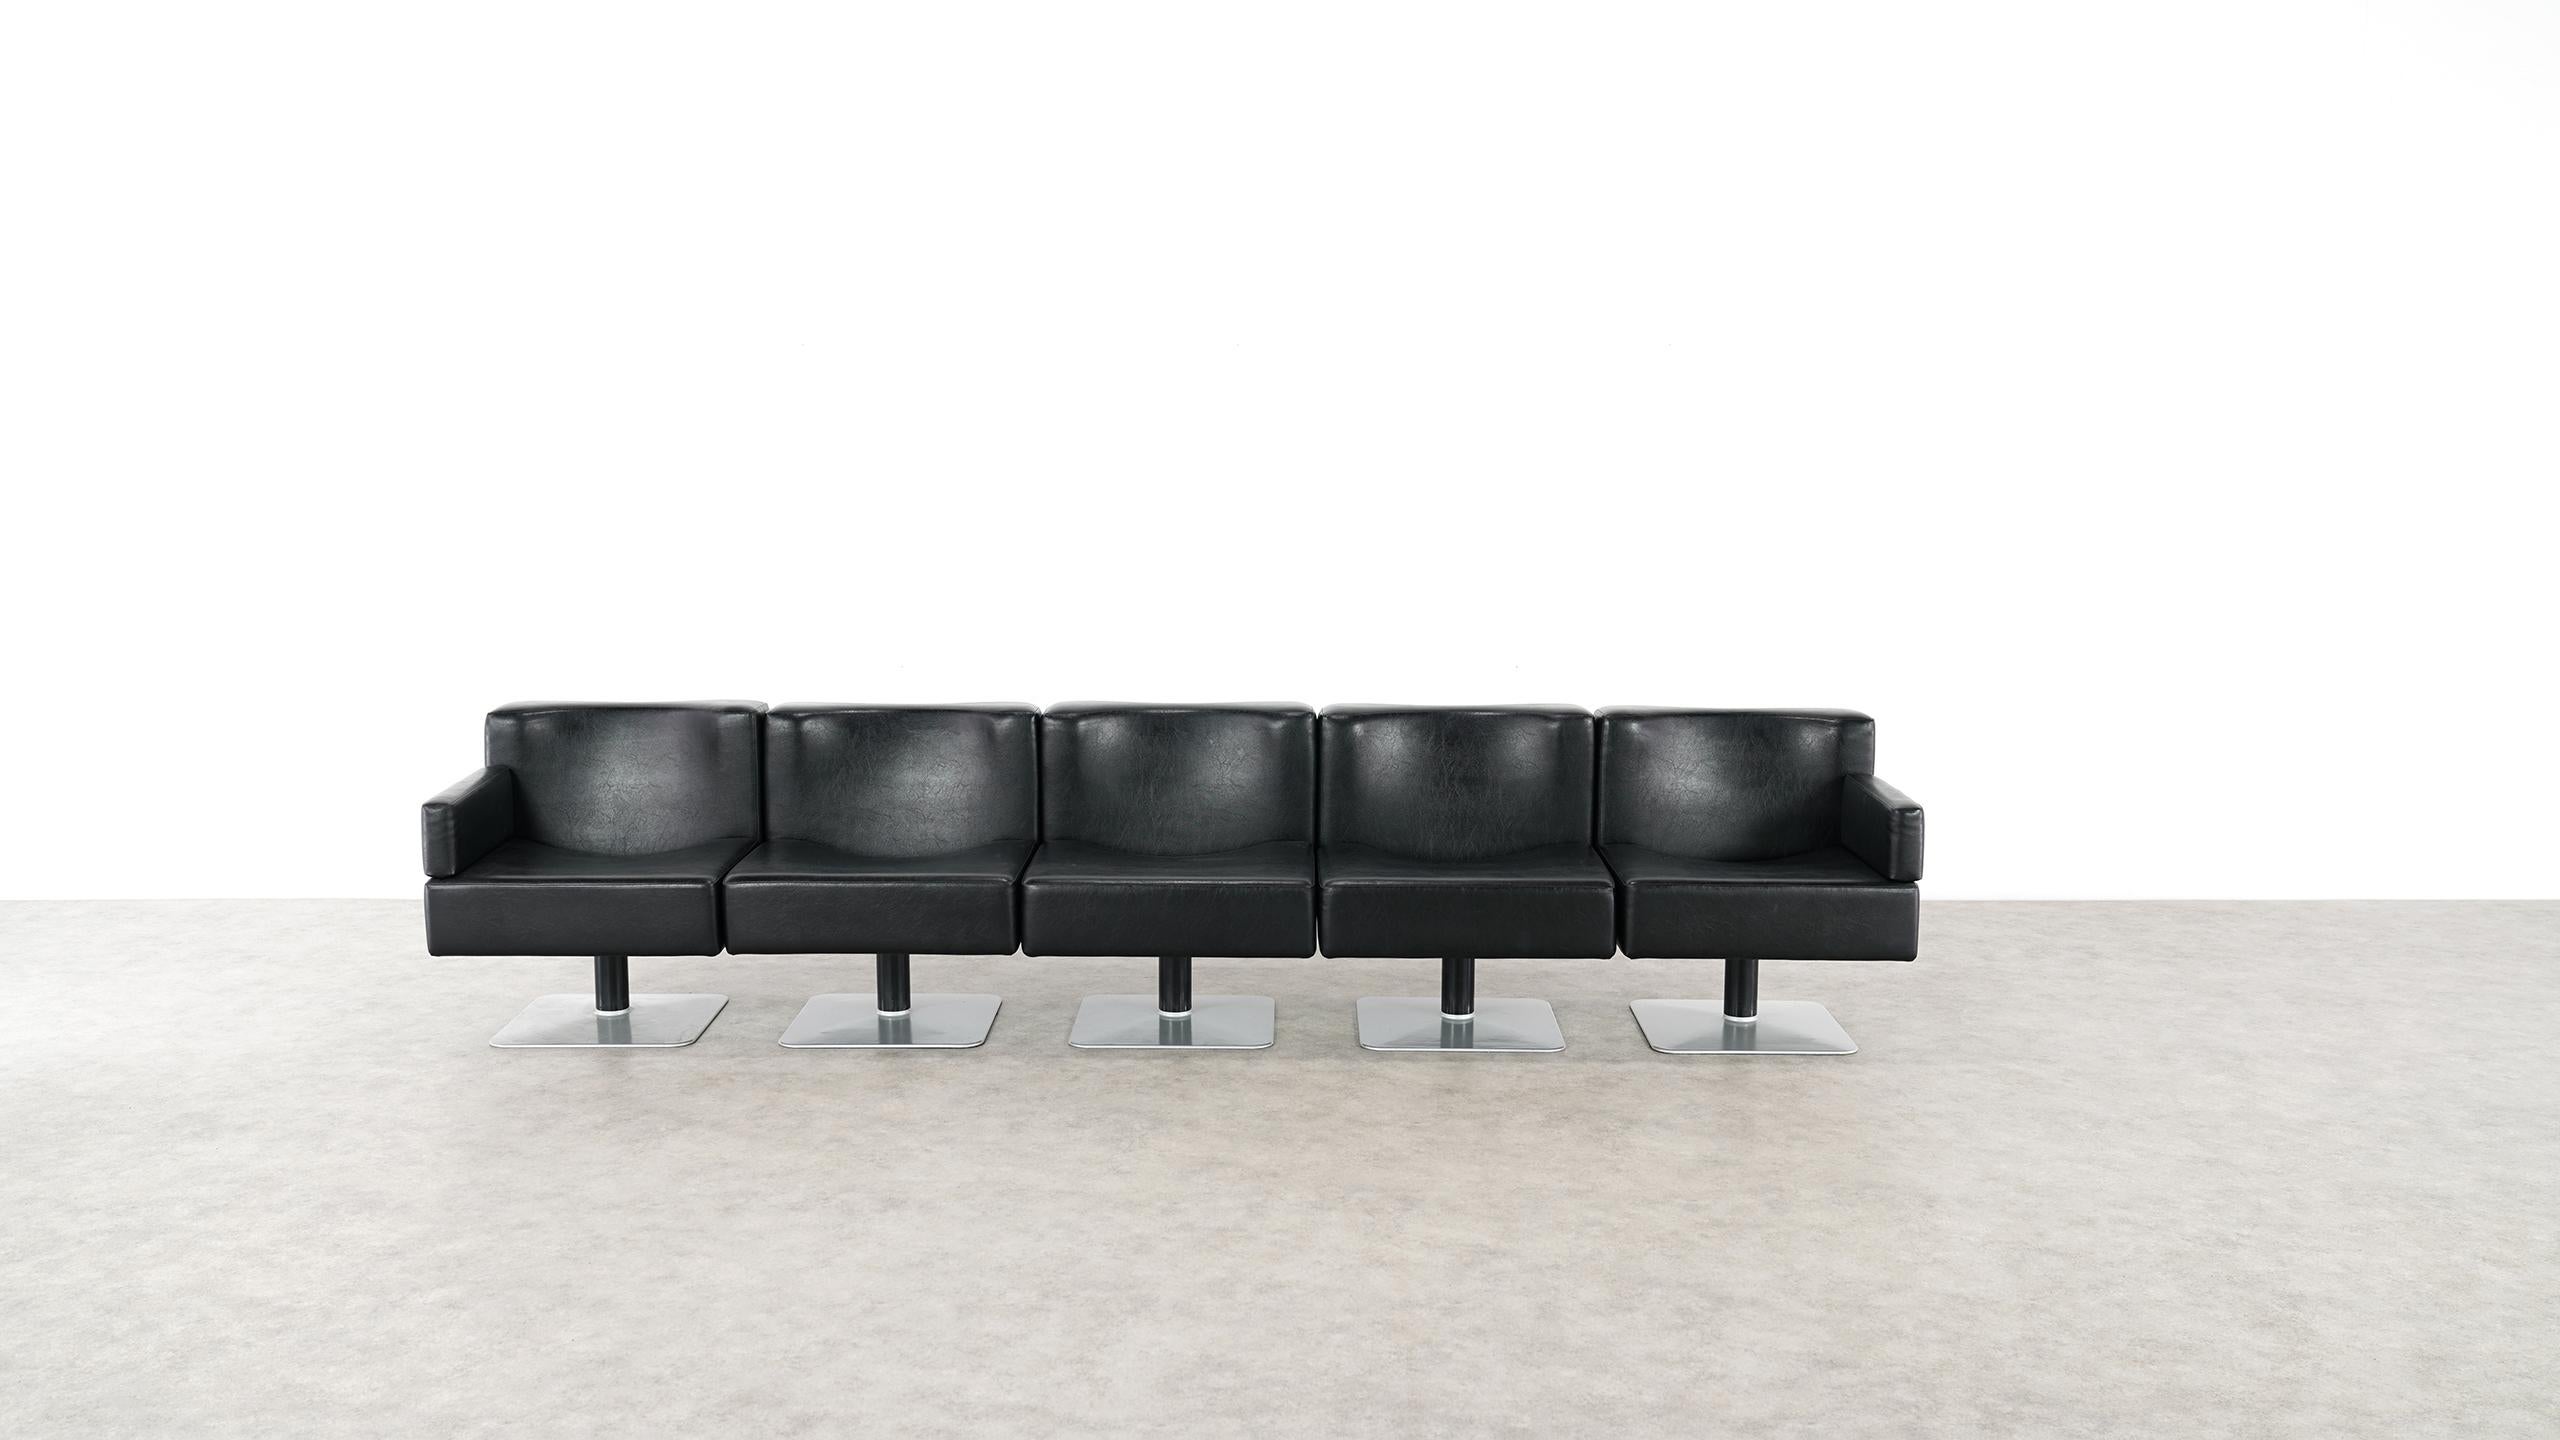 Modular Lounge Sofa or Chair or Table Set by Herbert Hirche 1974 Mauser, Germany 7